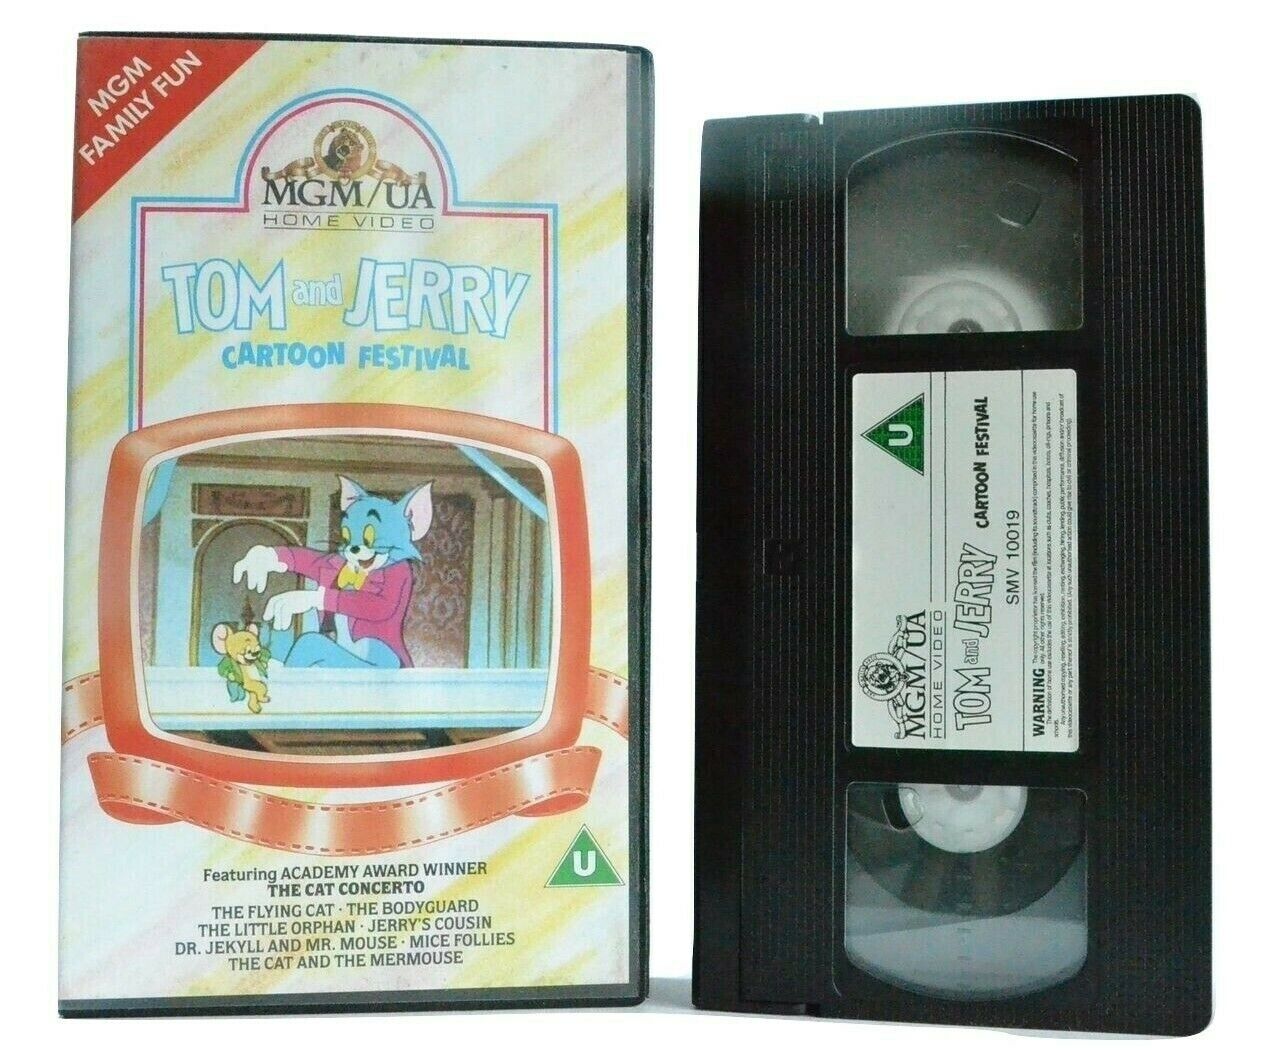 Tom And Jerry: Cartoon Festival - (1986) MGM/UA - Animated - Children's -  VHS 5013119100191 – Golden Class Movies LTD